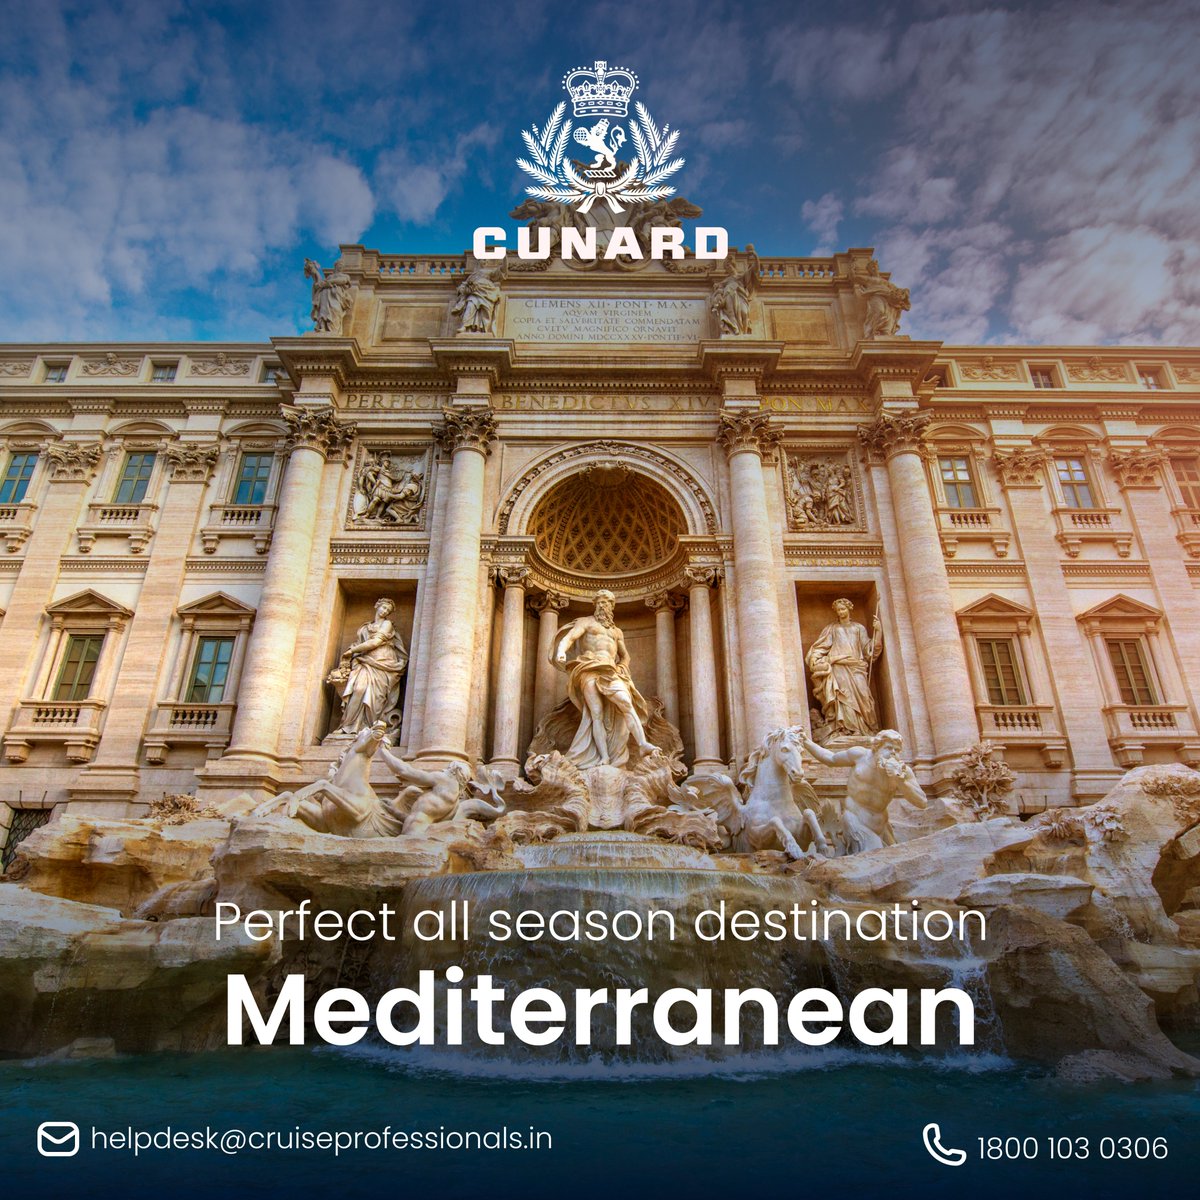 Discover an extraordinary way to see the world with Cunard. Discover the Mediterranean - an all-season perfect destination. 🙏

#cunard #cruiseprofessionals #queenvictoria #cruising #luxury #icon #cruisevacation #luxurytravels #cruiseship